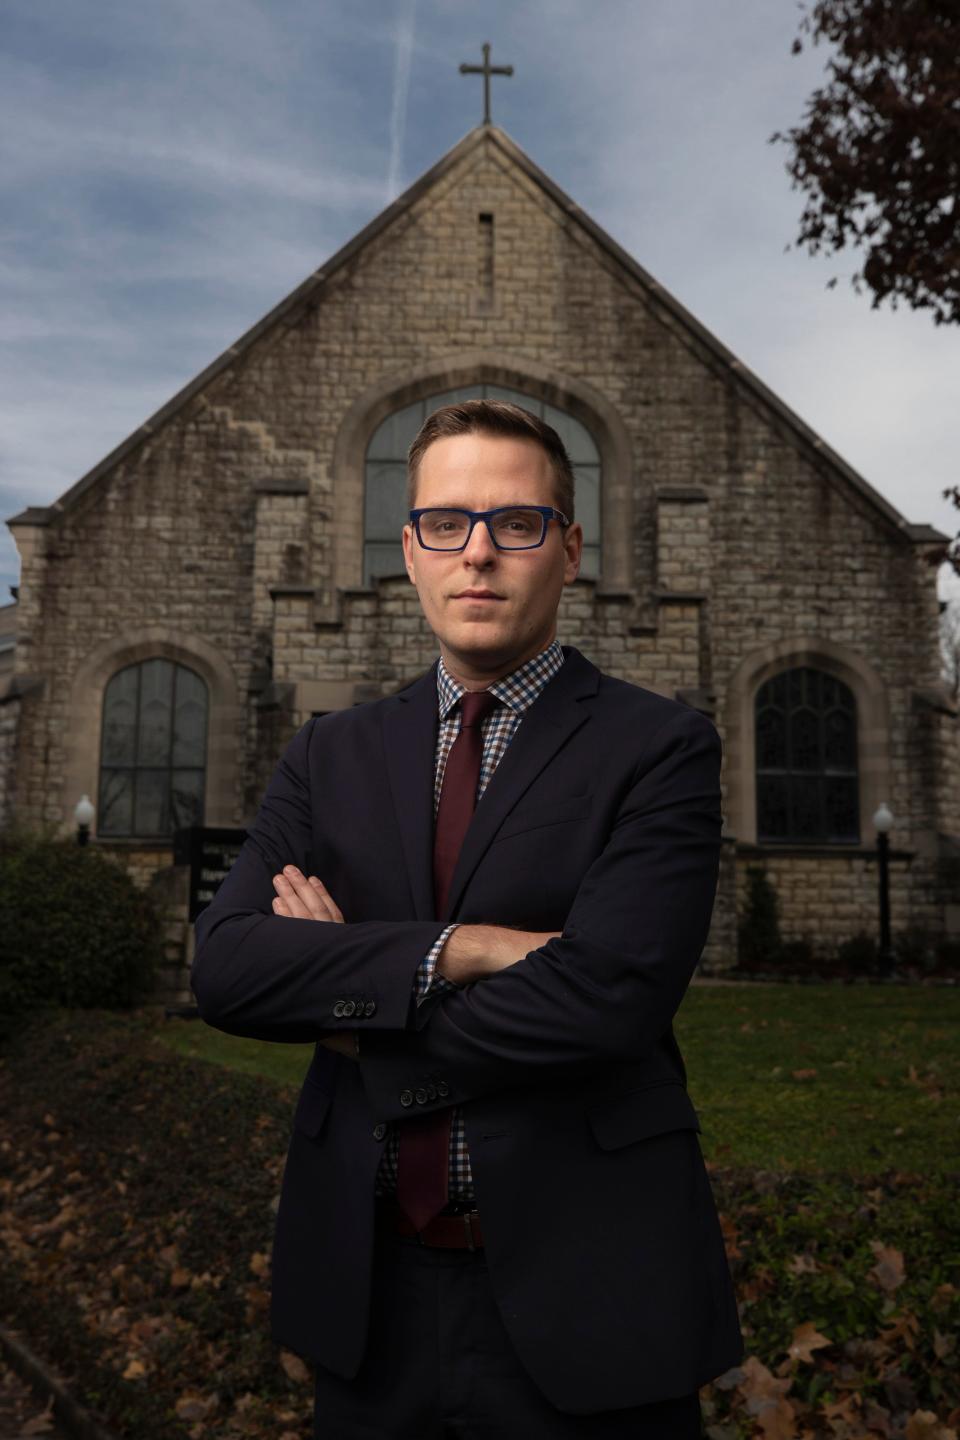 Guthrie Graves-Fitzsimmons, a Louisville Christian writer and activist, launched The Resistance Prays, a daily devotional for progressive Christians. Graves-Fitzsimmons is listed as a faith leader to watch this year by Center for American Progress and will be releasing a book in 2020 called "Just Faith." Nov. 22, 2019